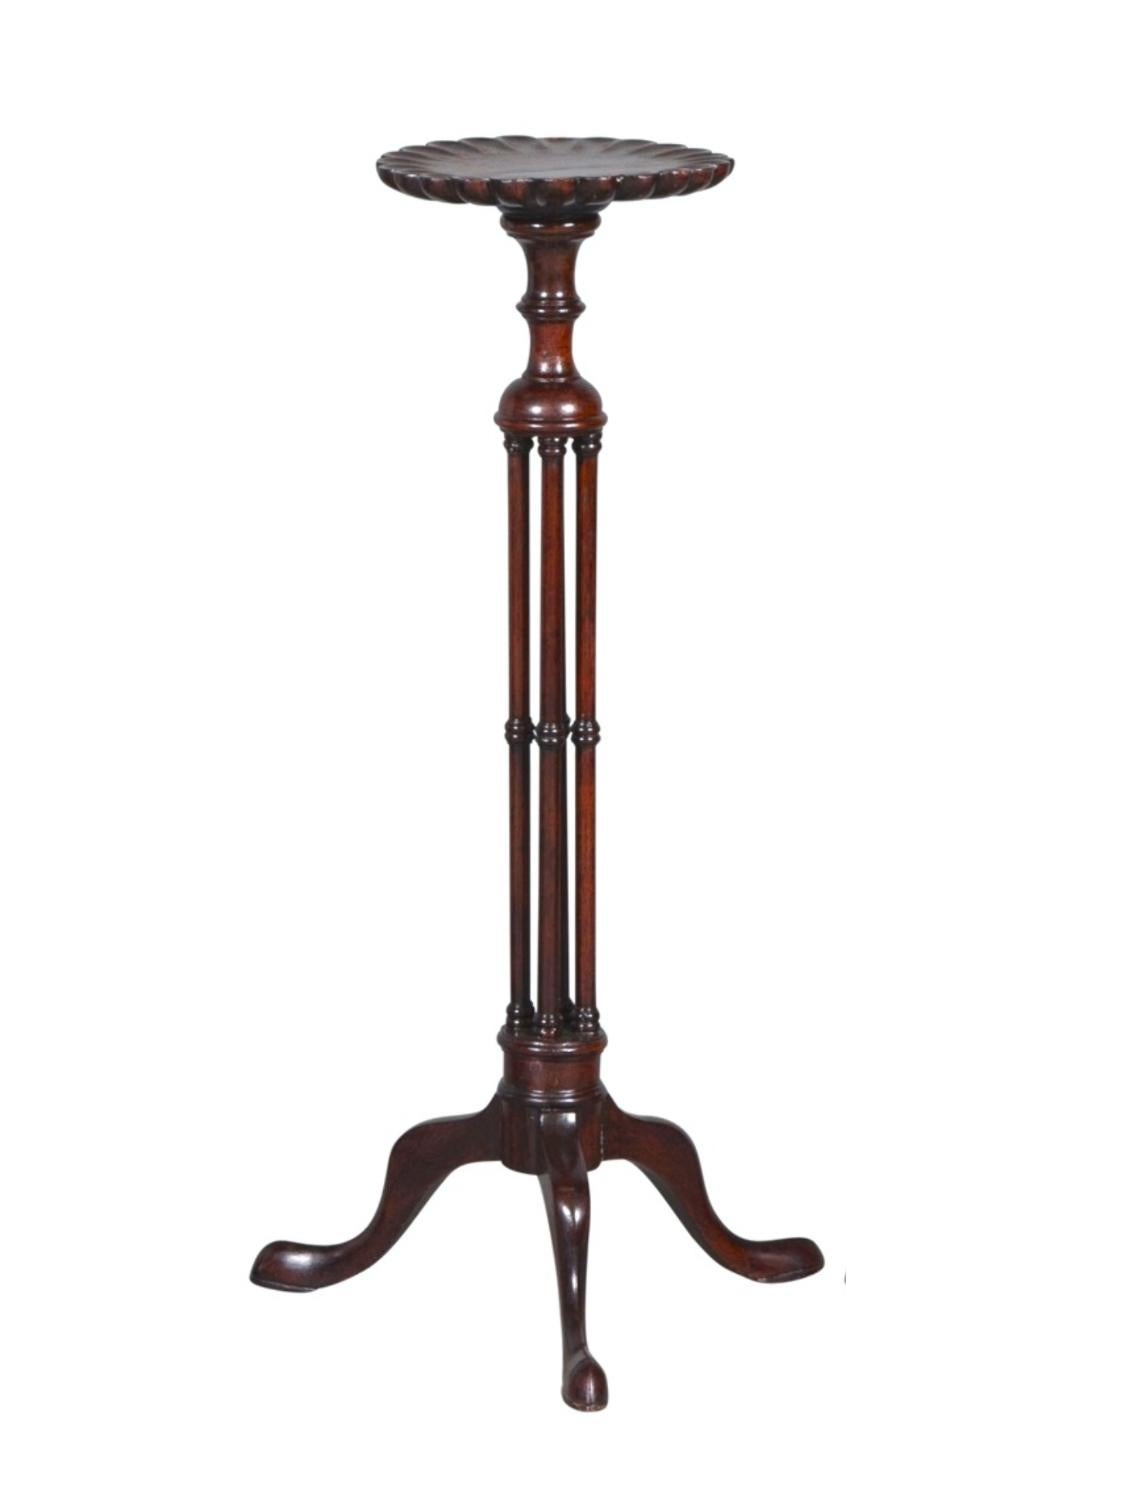 Mid-18th Century 19th Century English Chippendale Style Pair Tripod Foot Candle Stand / Pedestal For Sale